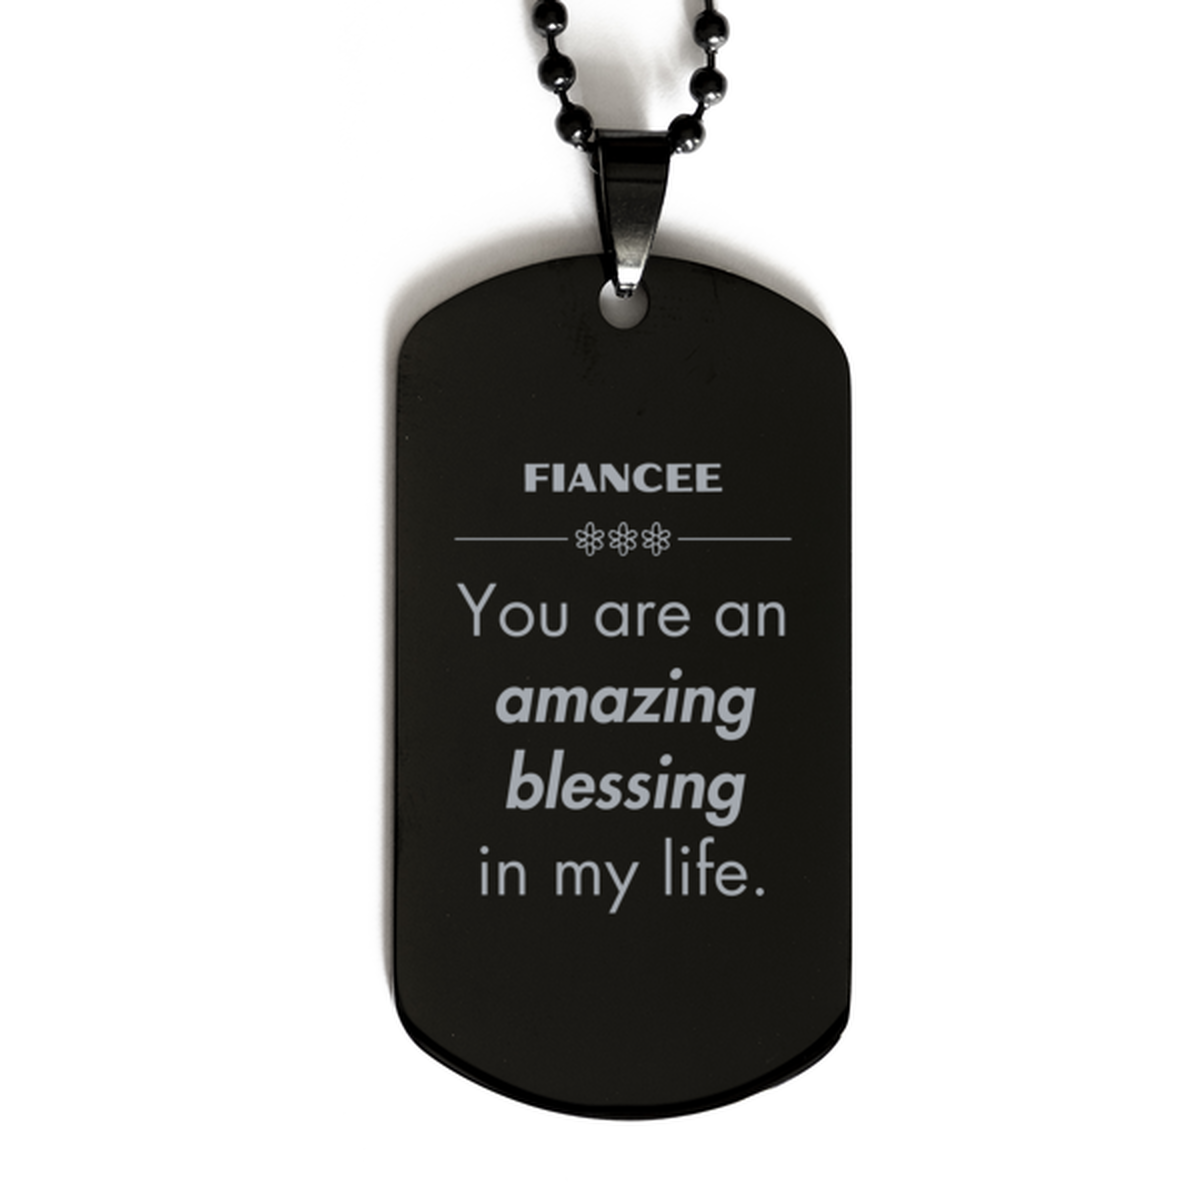 Fiancee Black Dog Tag, You are an amazing blessing in my life, Thank You Gifts For Fiancee, Inspirational Birthday Christmas Unique Gifts For Fiancee